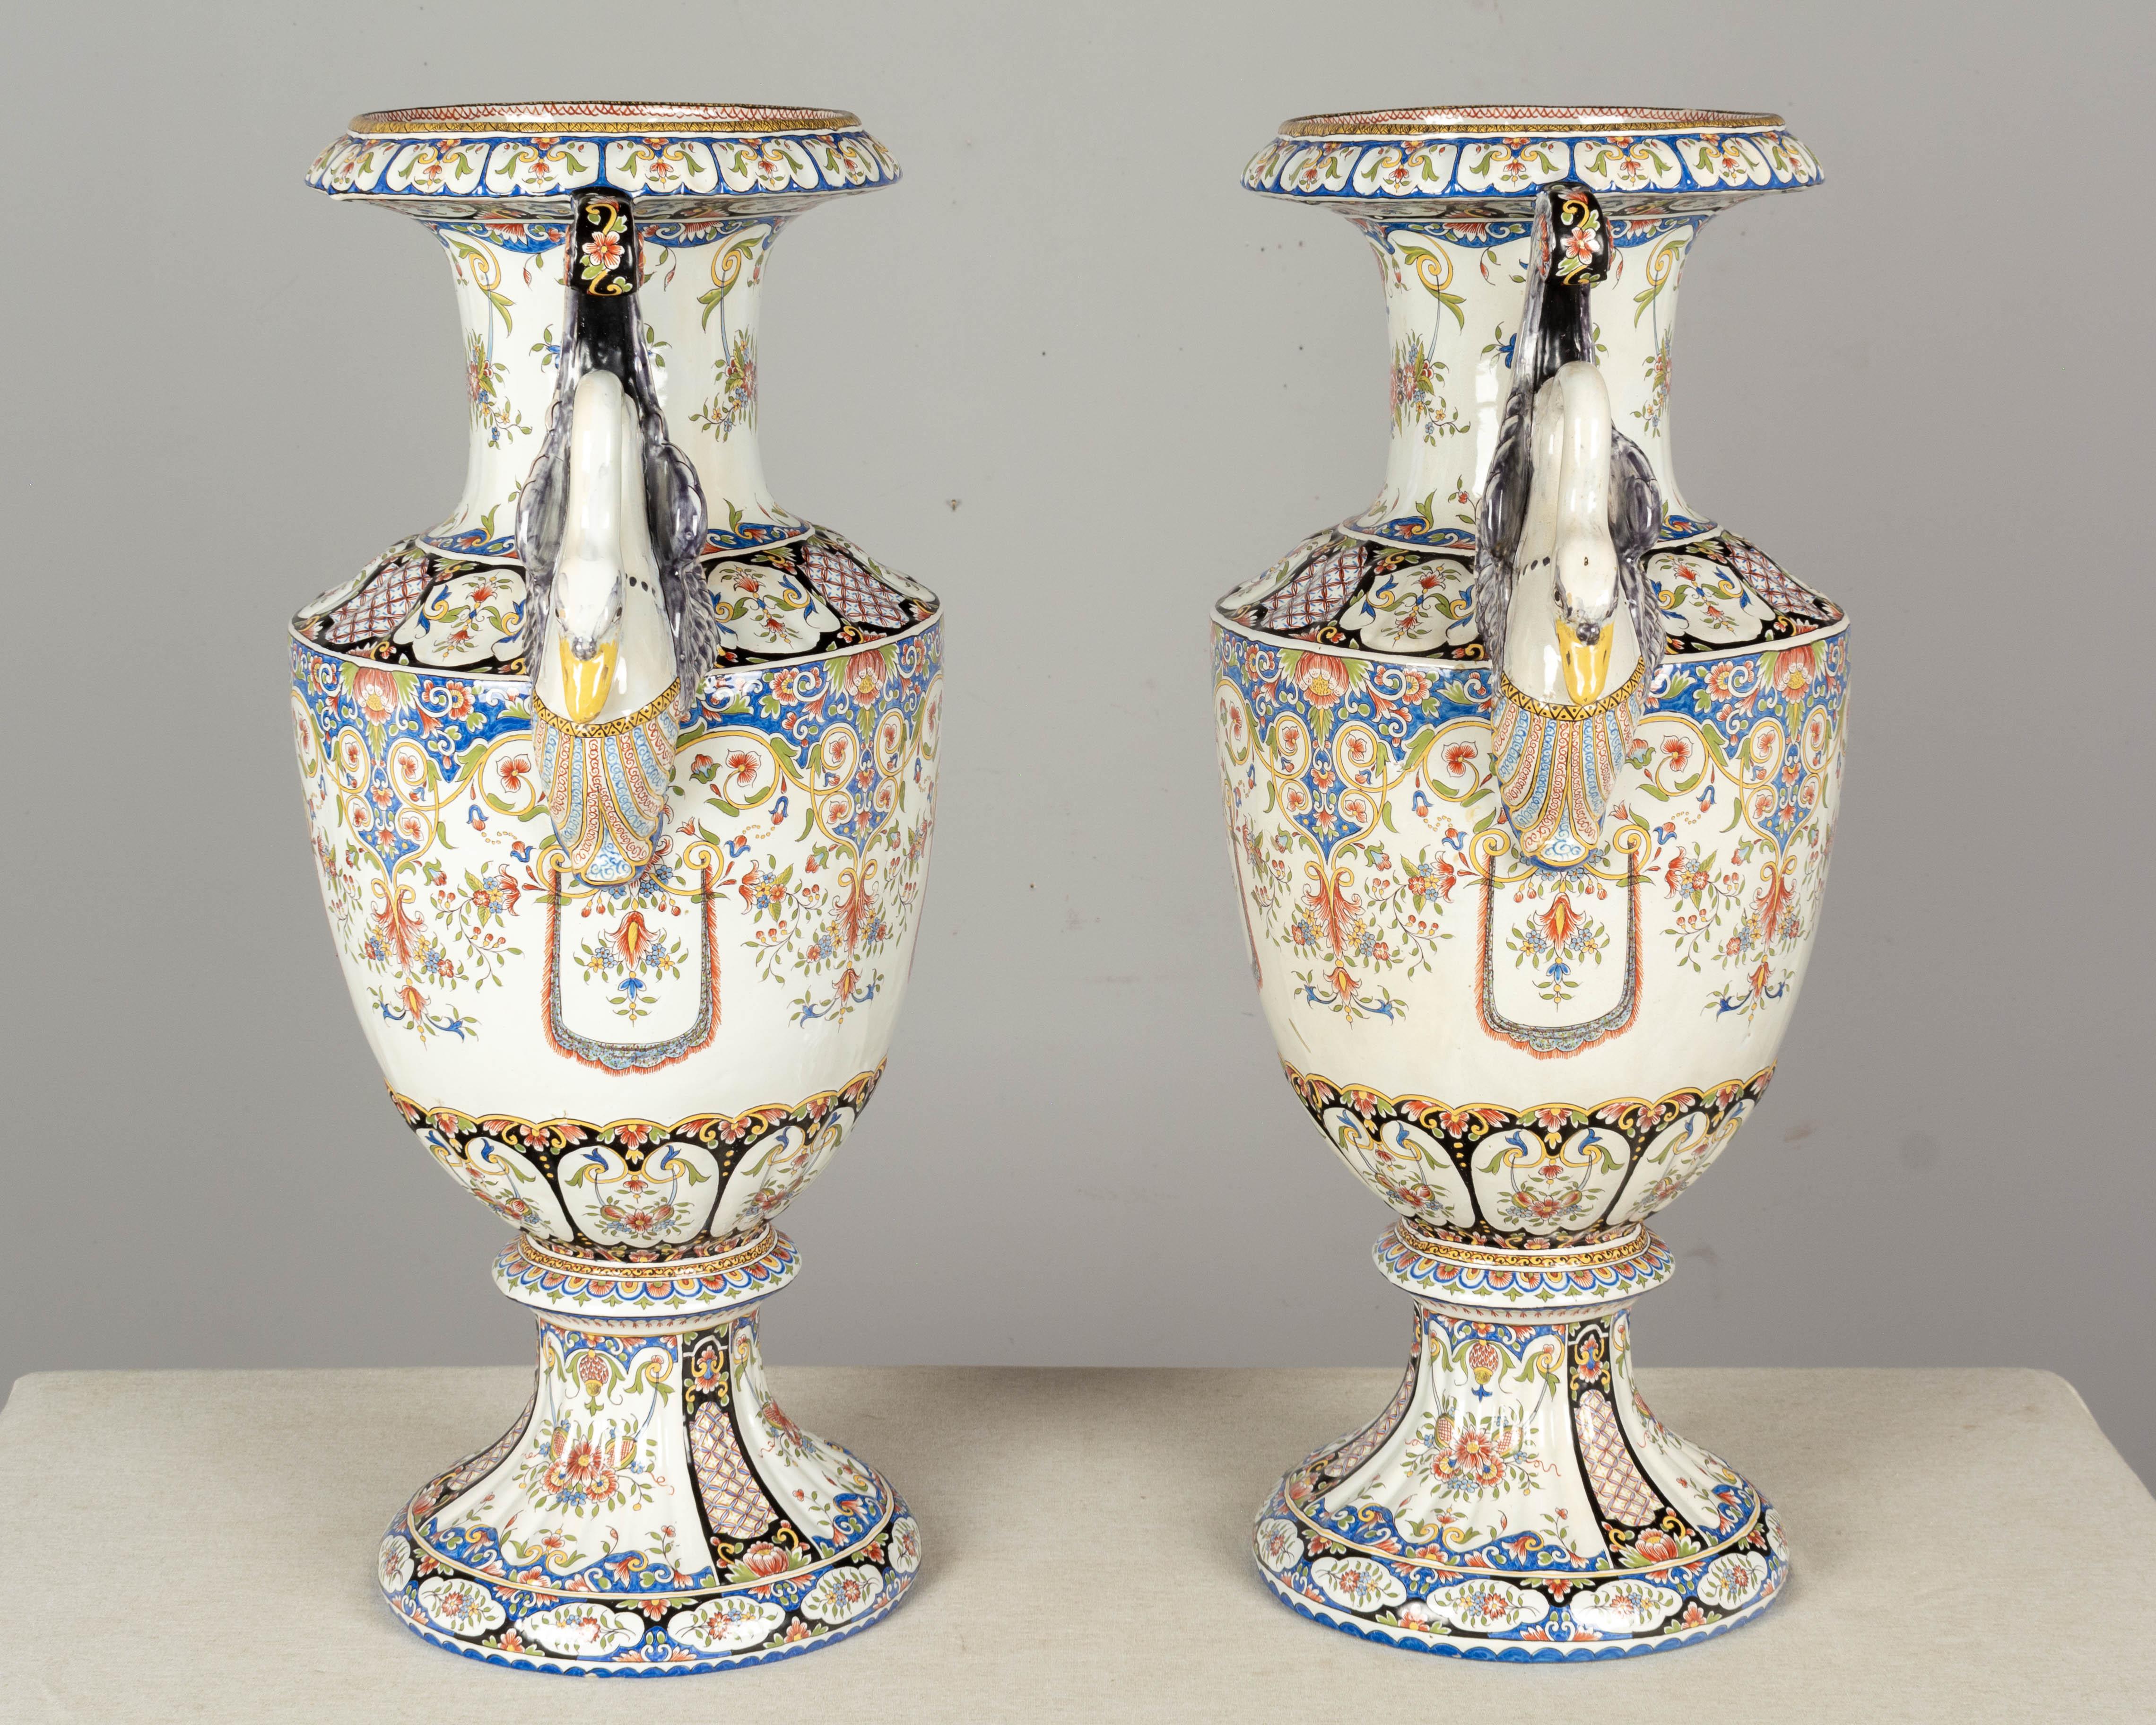 Hand-Painted 19th Century French Desvres Faience Urns, a Pair For Sale